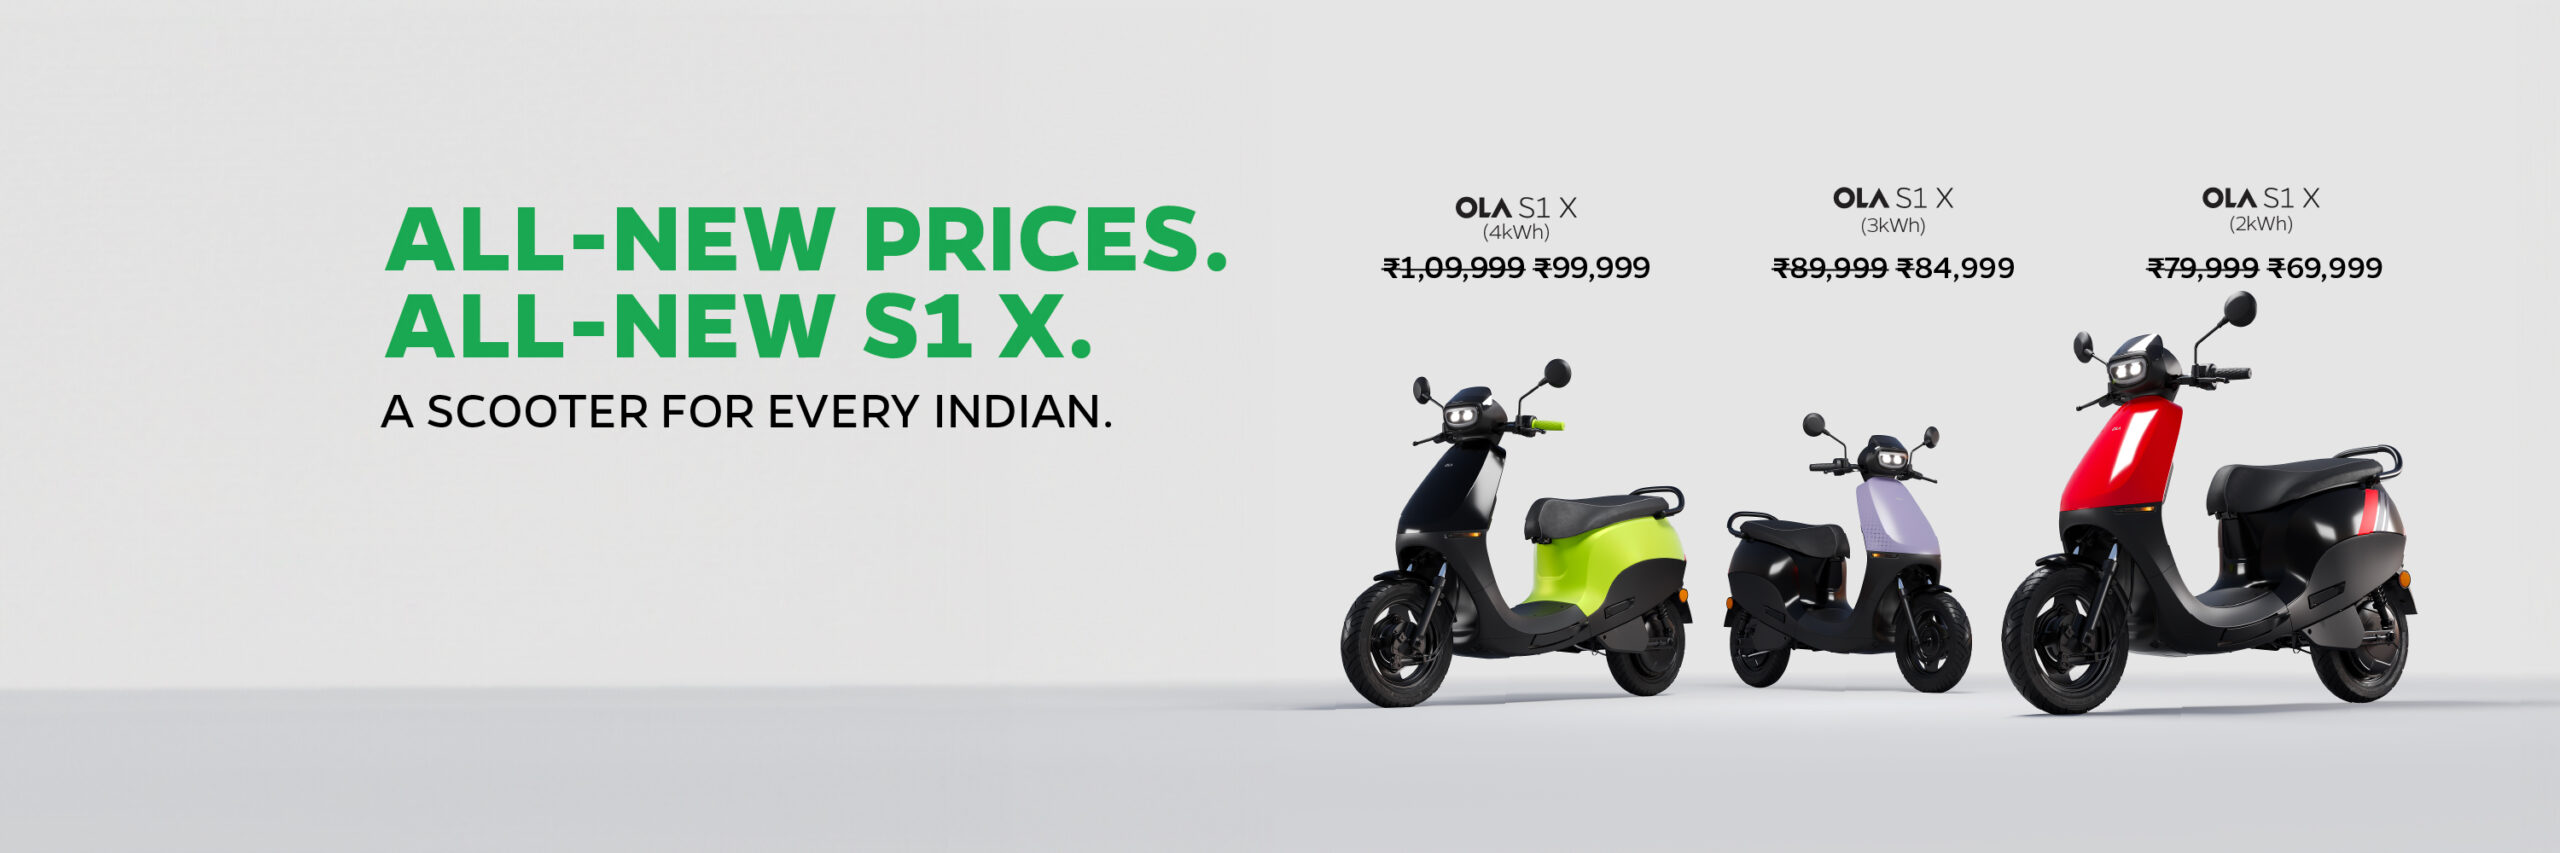 Ola S1 X Portfolio Starts From As Low As Rs. 69,999!